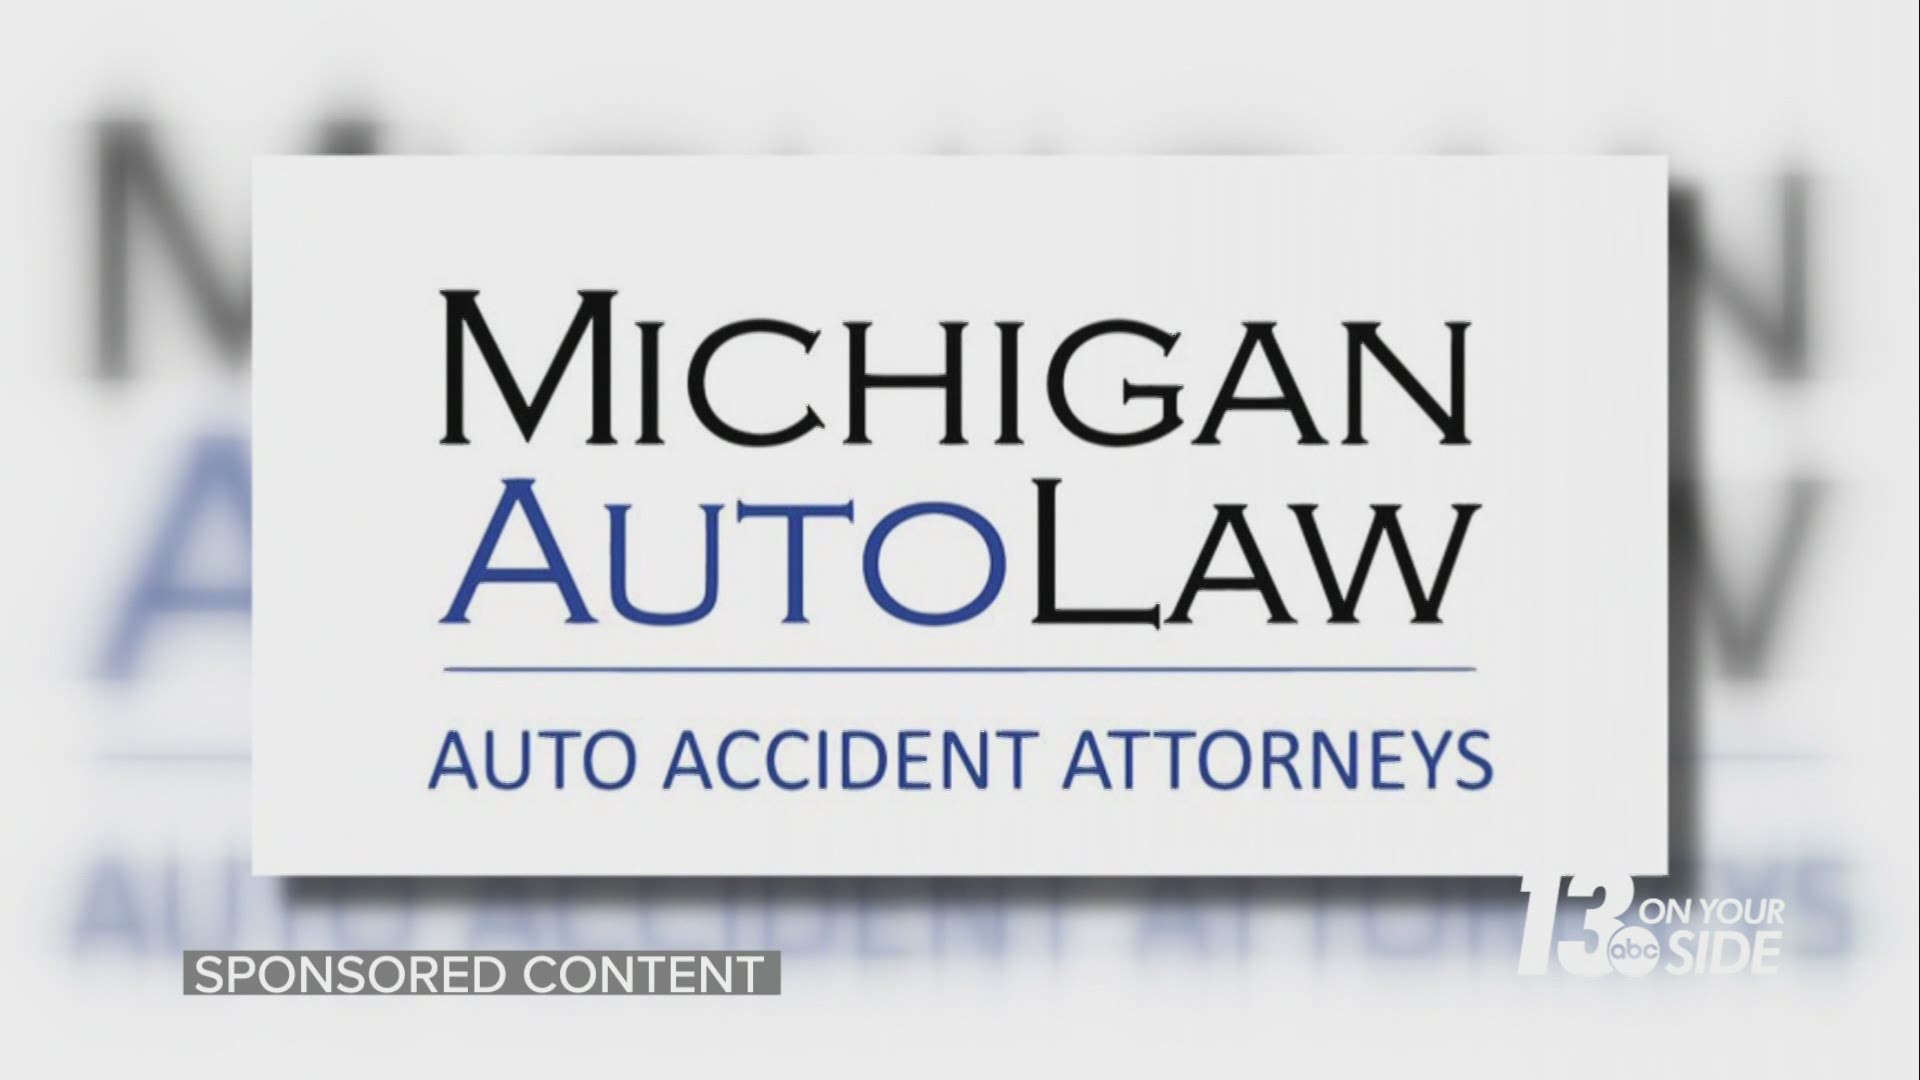 On July 1, changes that were originally made to Michigan’s No-Fault auto insurance law back in 2019 will take full effect.